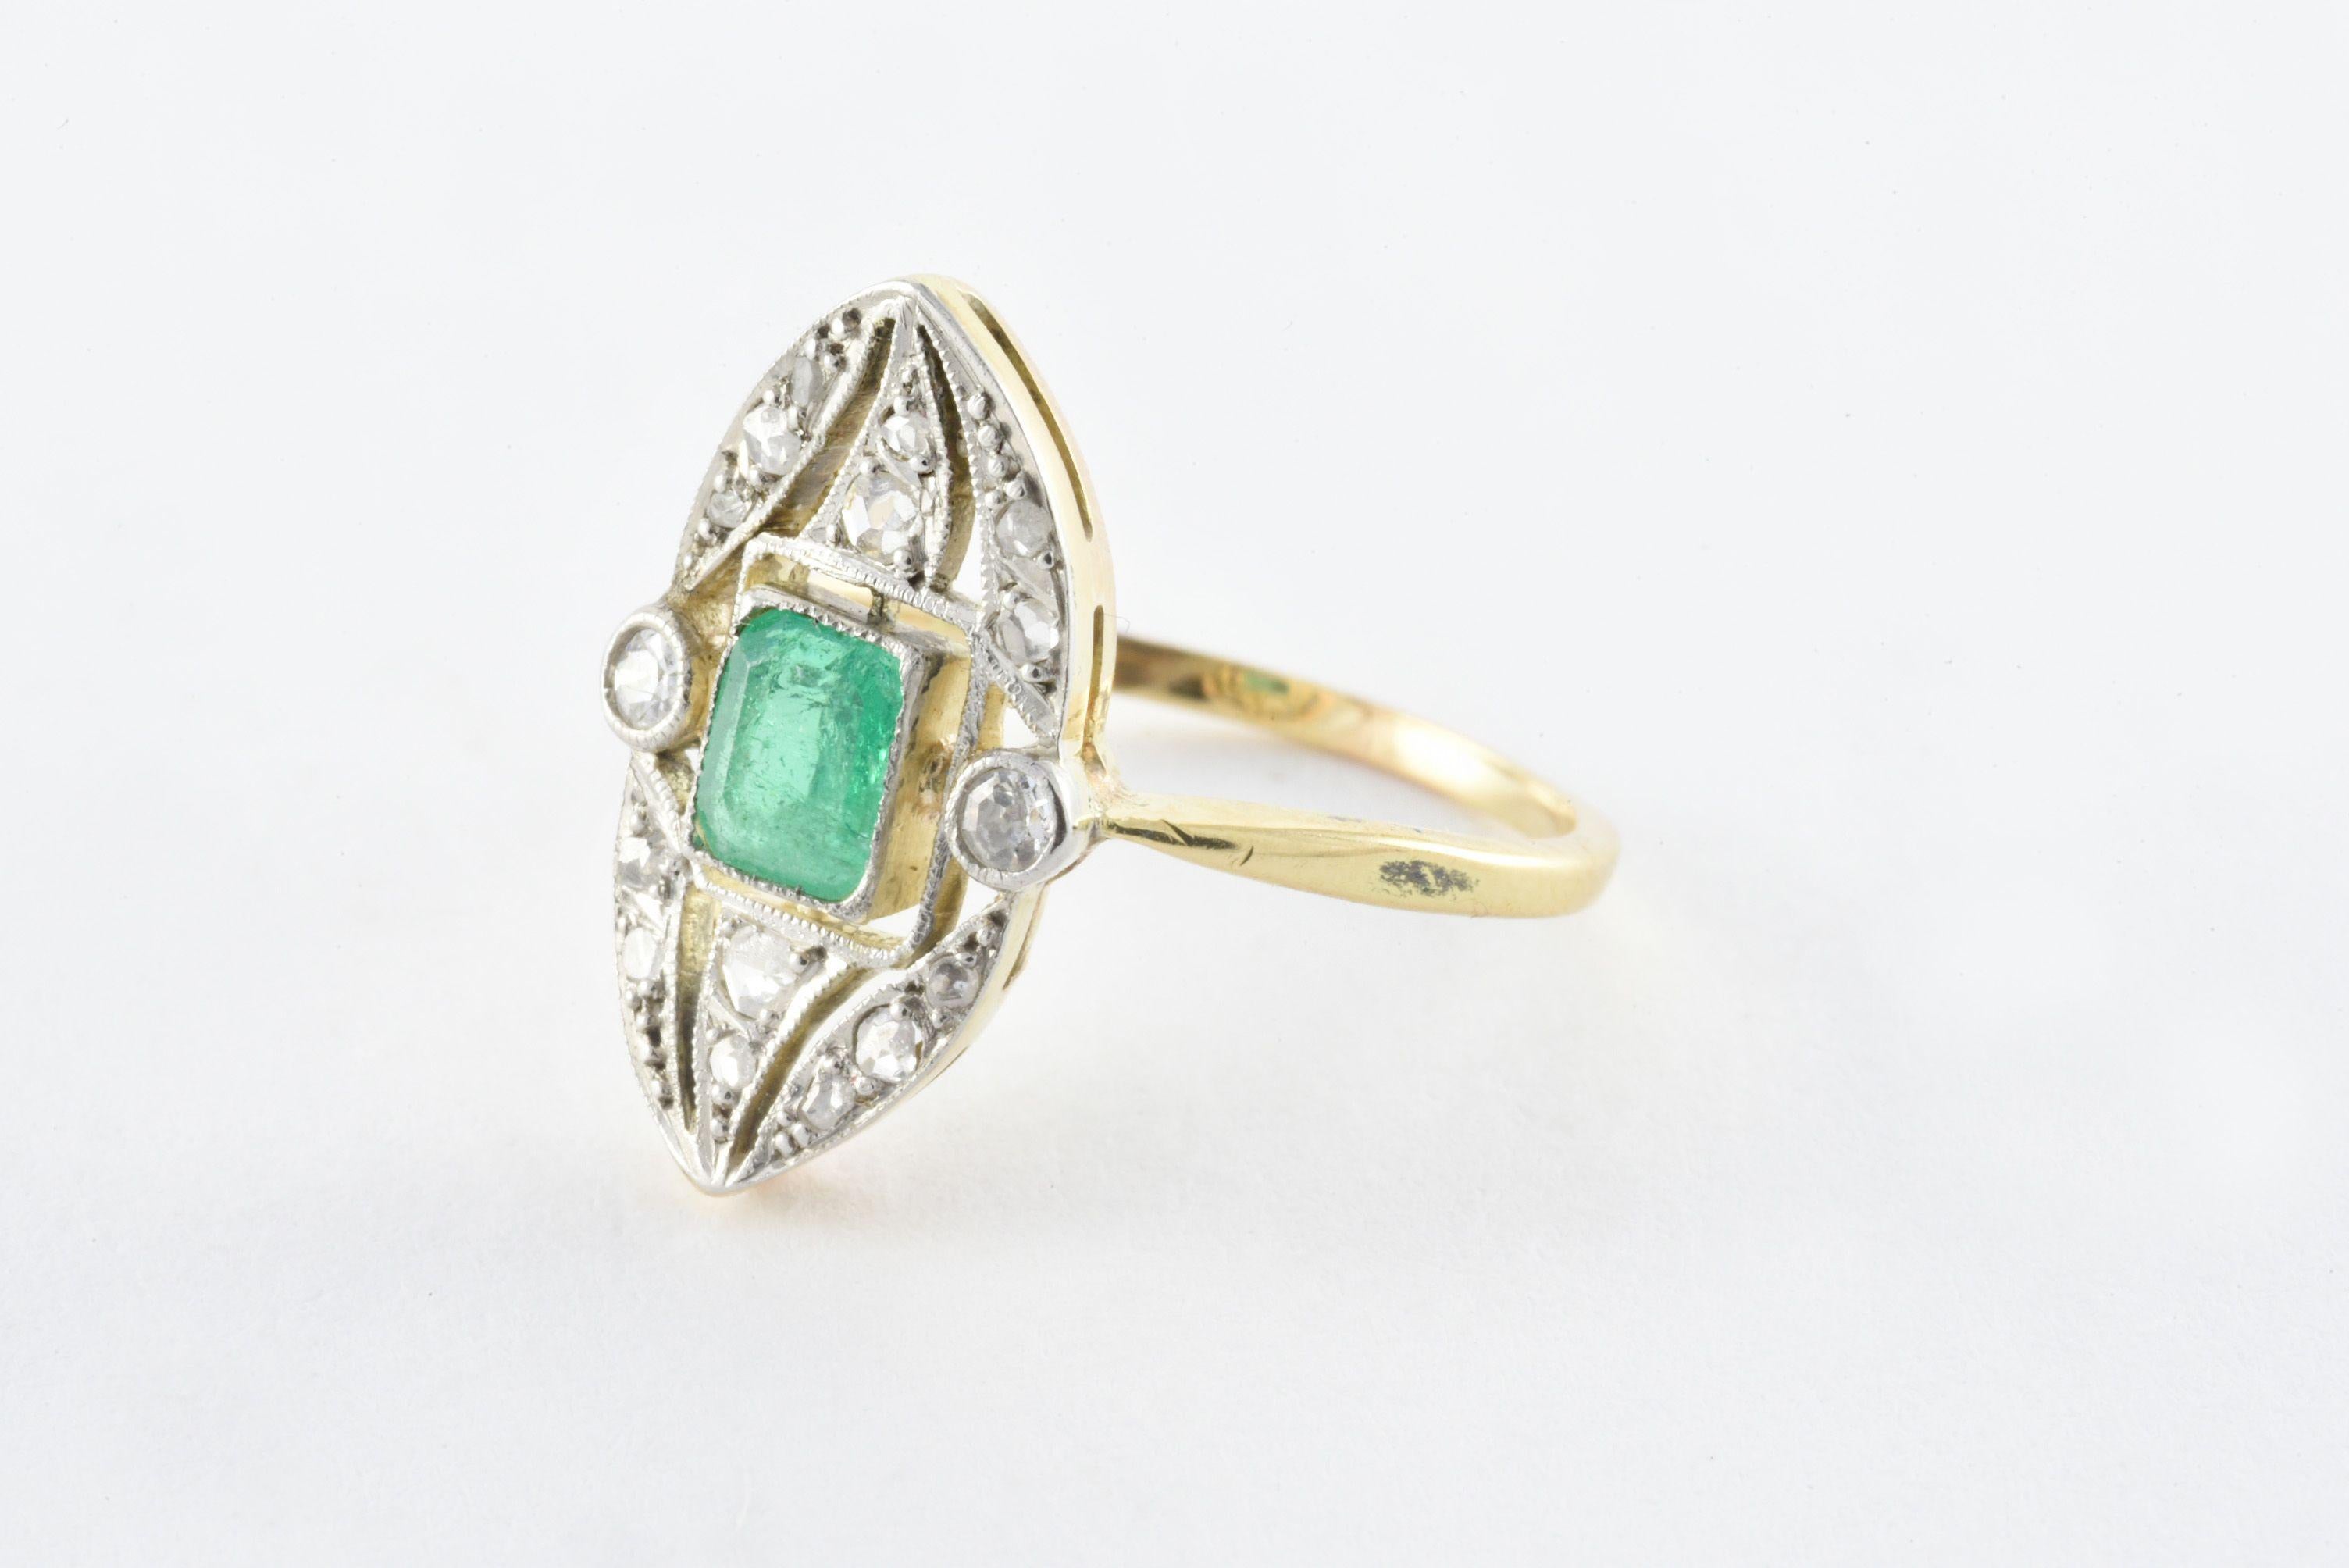 This antique Edwardian-era openwork navette-shaped band highlights a vibrant emerald-shaped green emerald center stone measuring 5 mm X 4 mm, flanked by two single cut diamonds and surrounded by fourteen rose cut diamonds set in 18kt yellow and